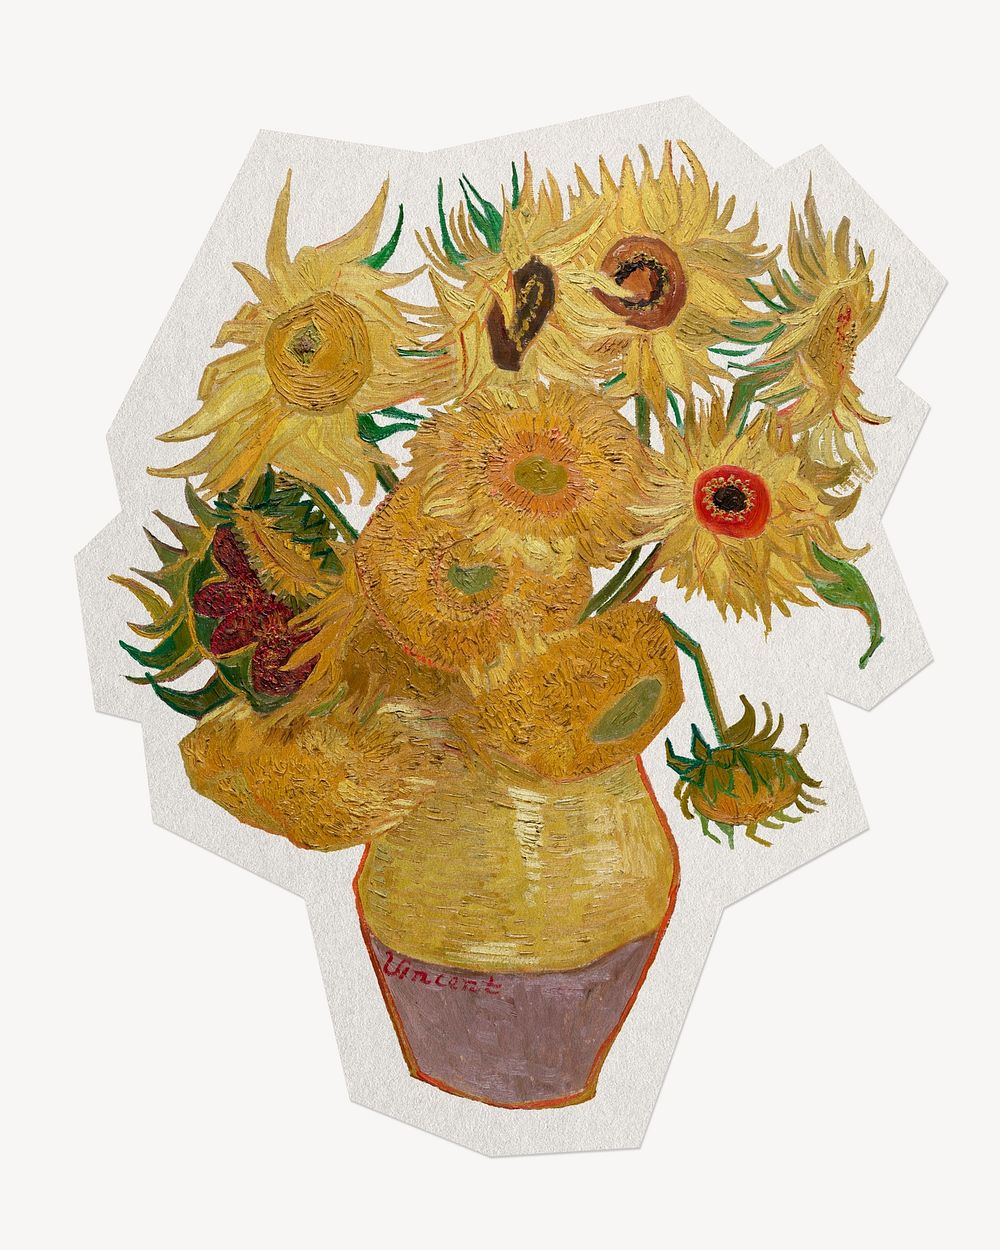 Van Gogh's Vase with Twelve Sunflowers, paper collage element, remixed by rawpixel.